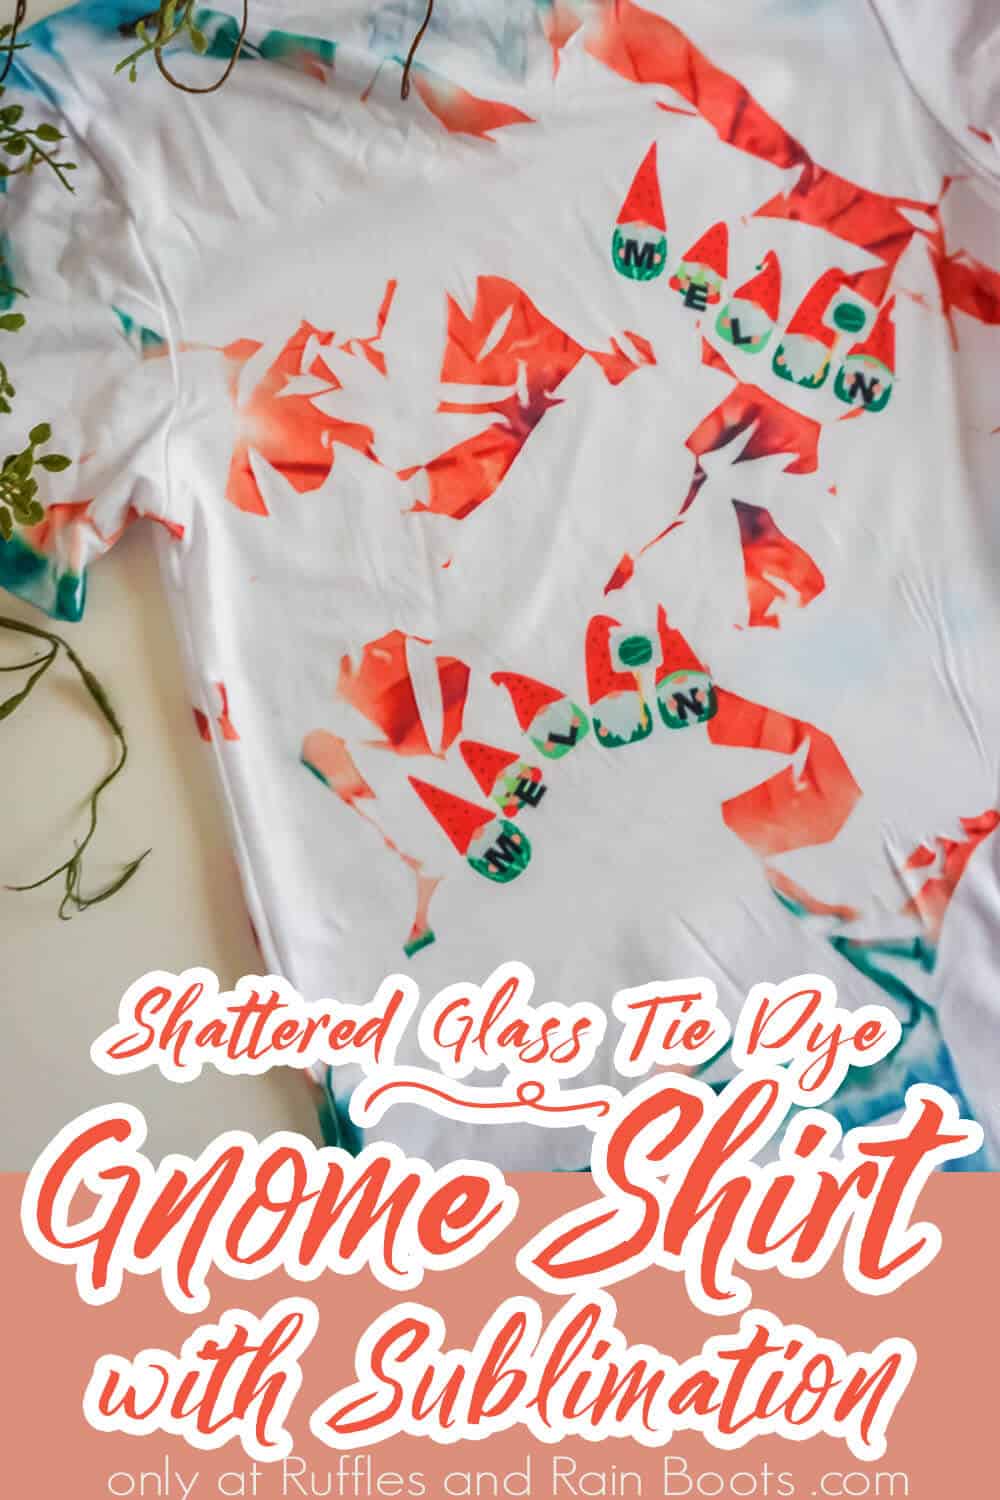 sublimation gnome shirt with text which reads shattered glass tie dye gnome shirt with sublimation